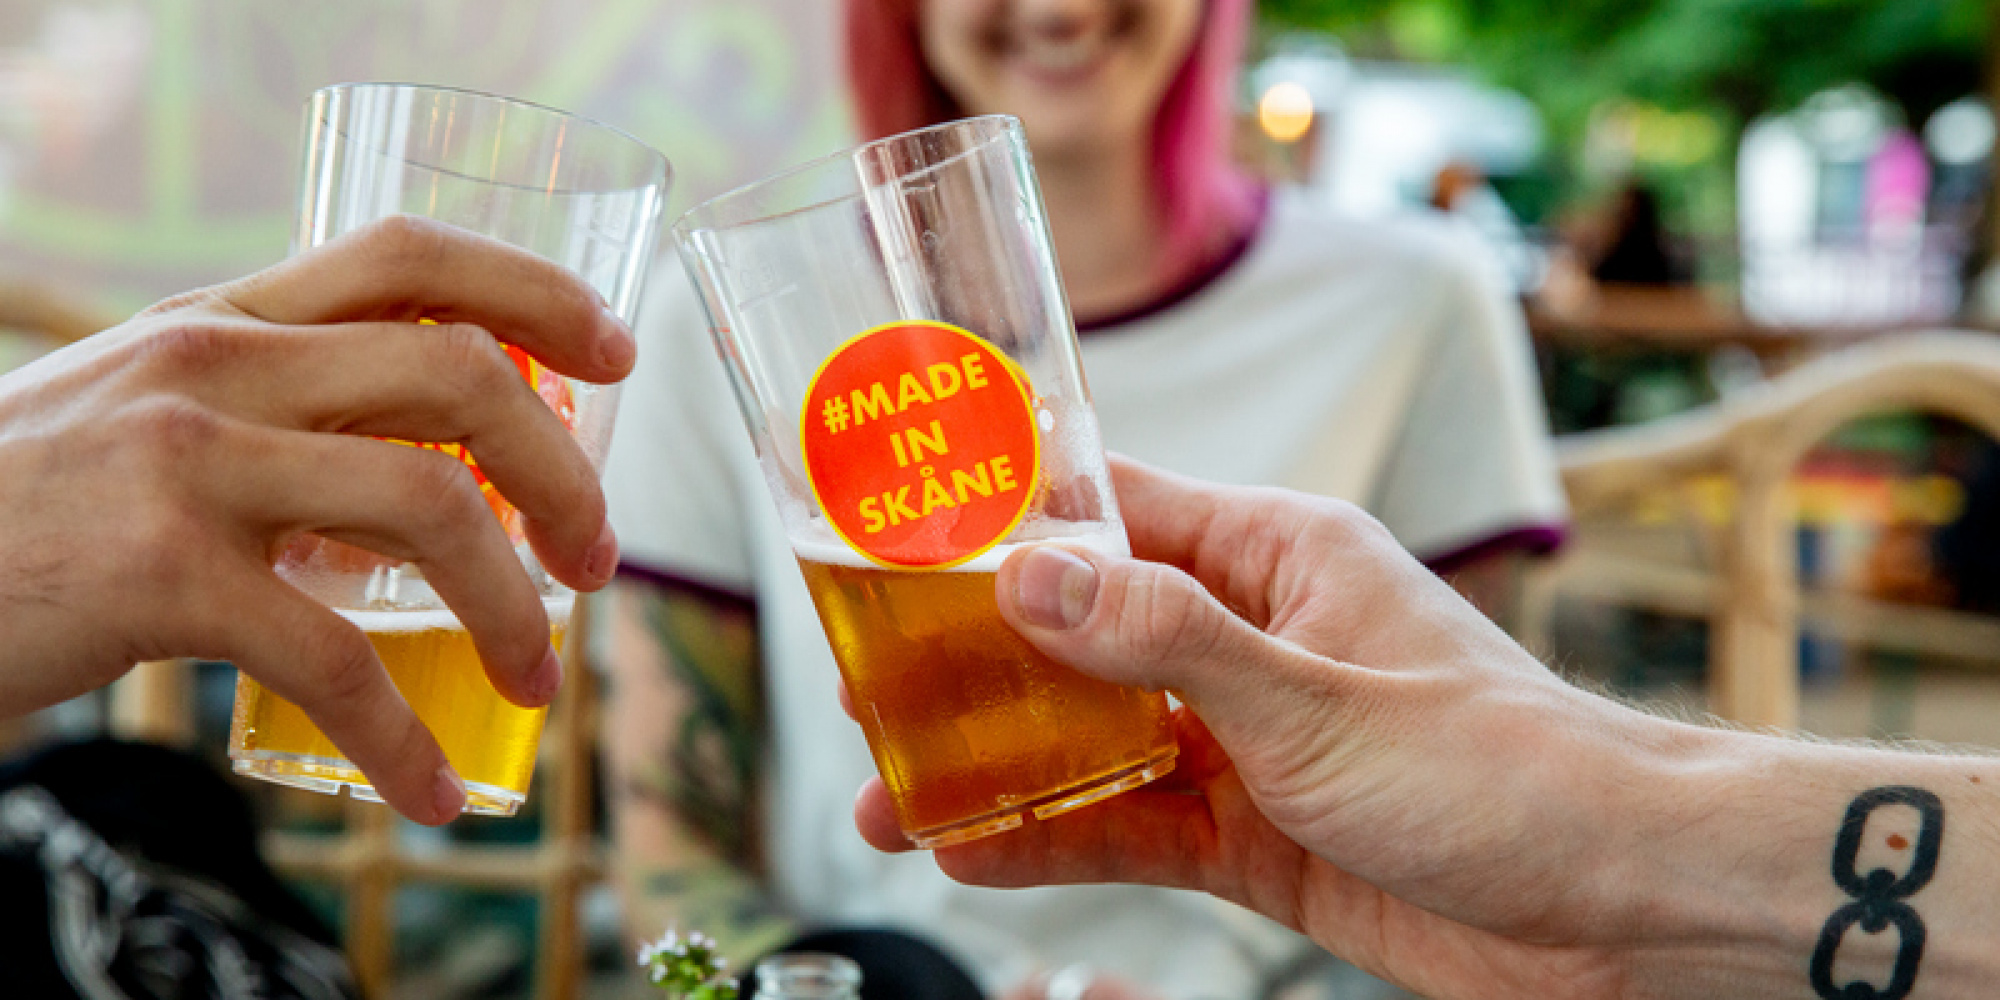 Glasses of beer with the text "Made in Skåne"